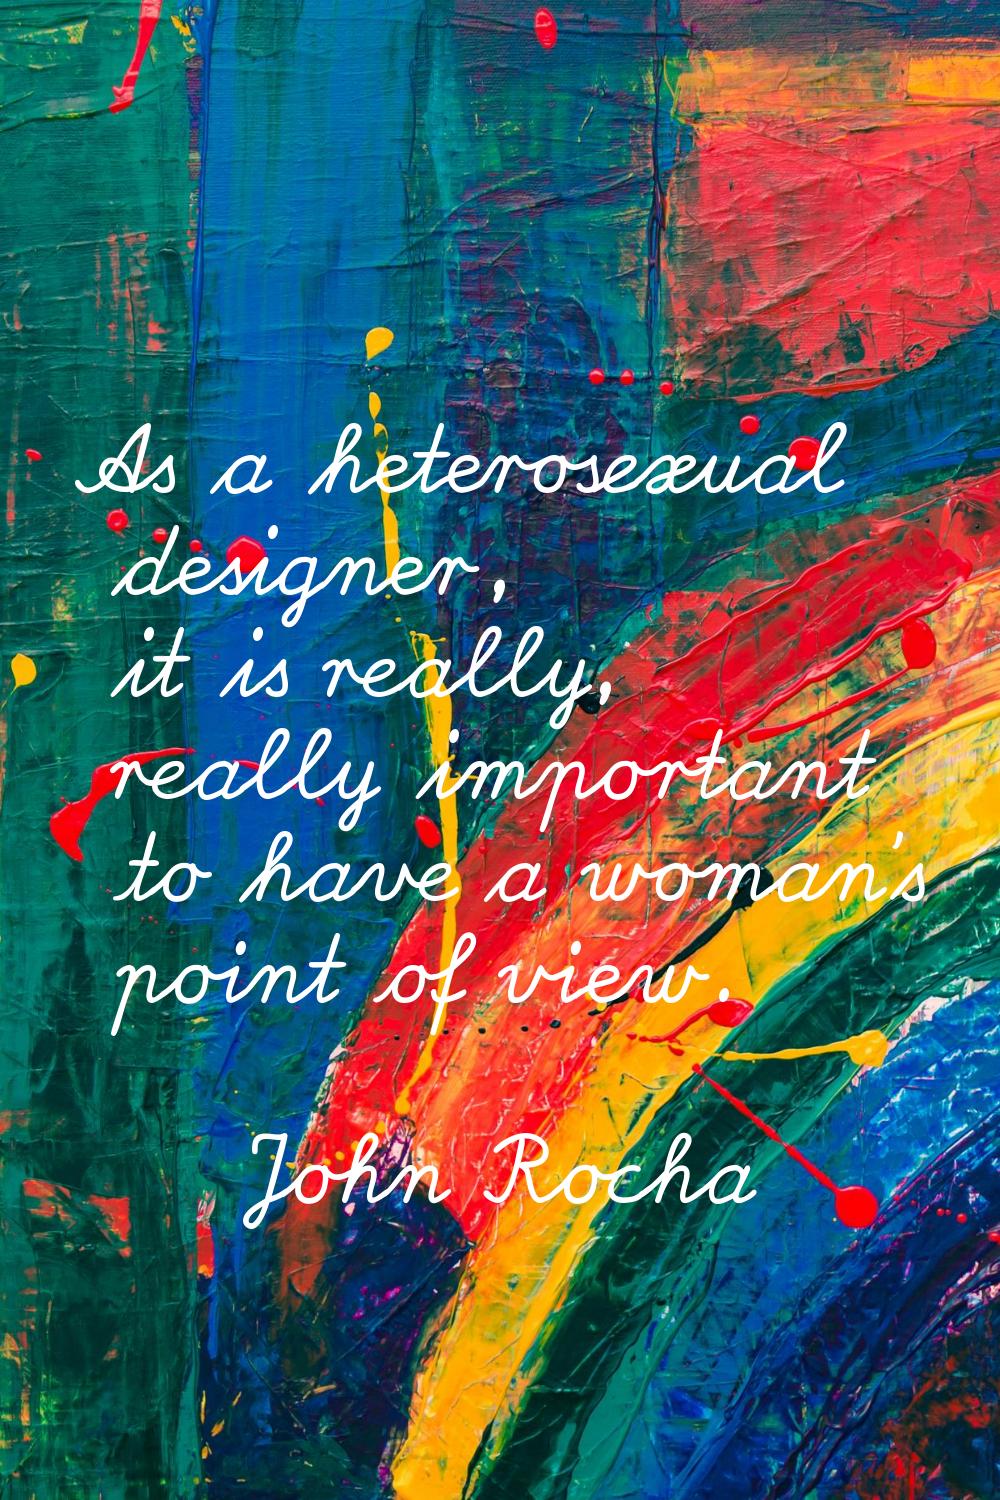 As a heterosexual designer, it is really, really important to have a woman's point of view.